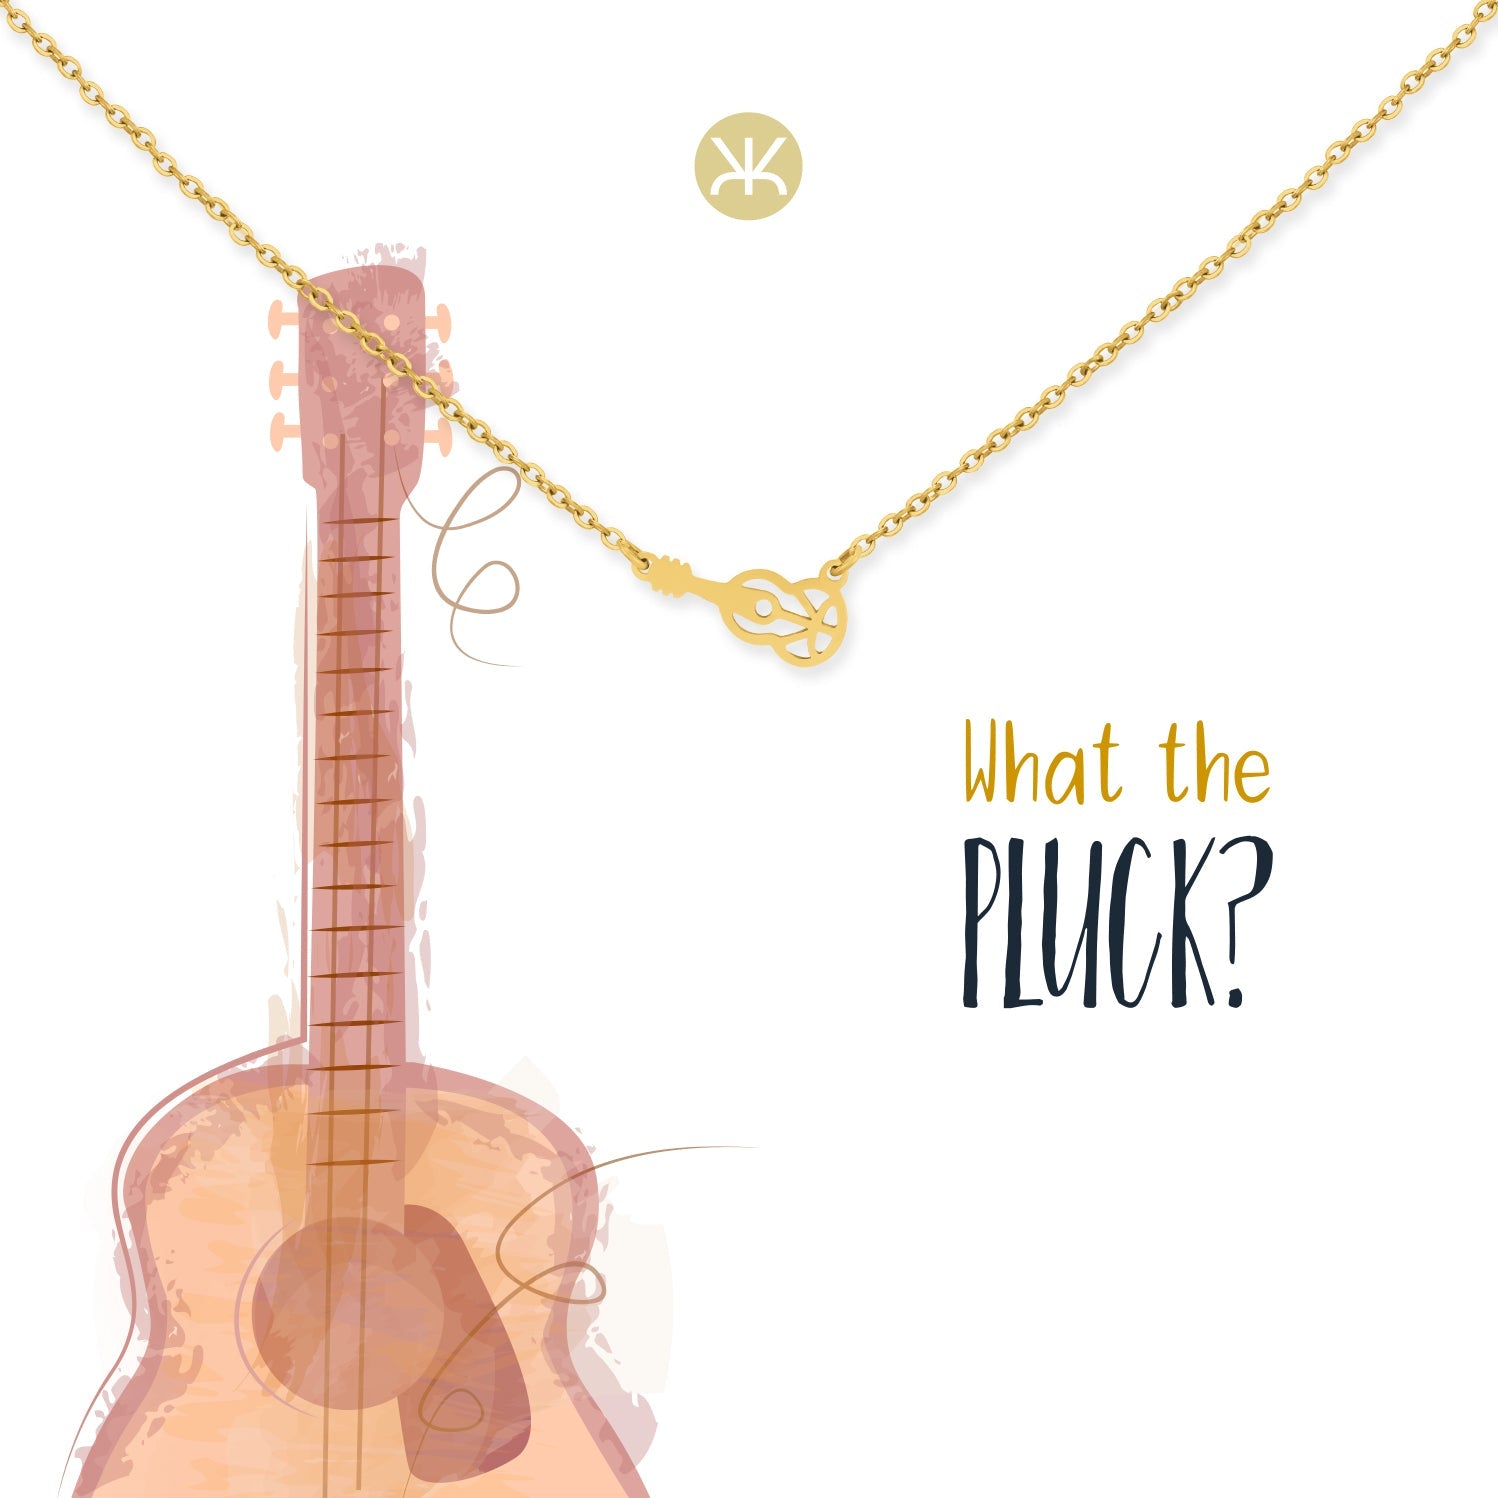 Guitar Necklace, Gold